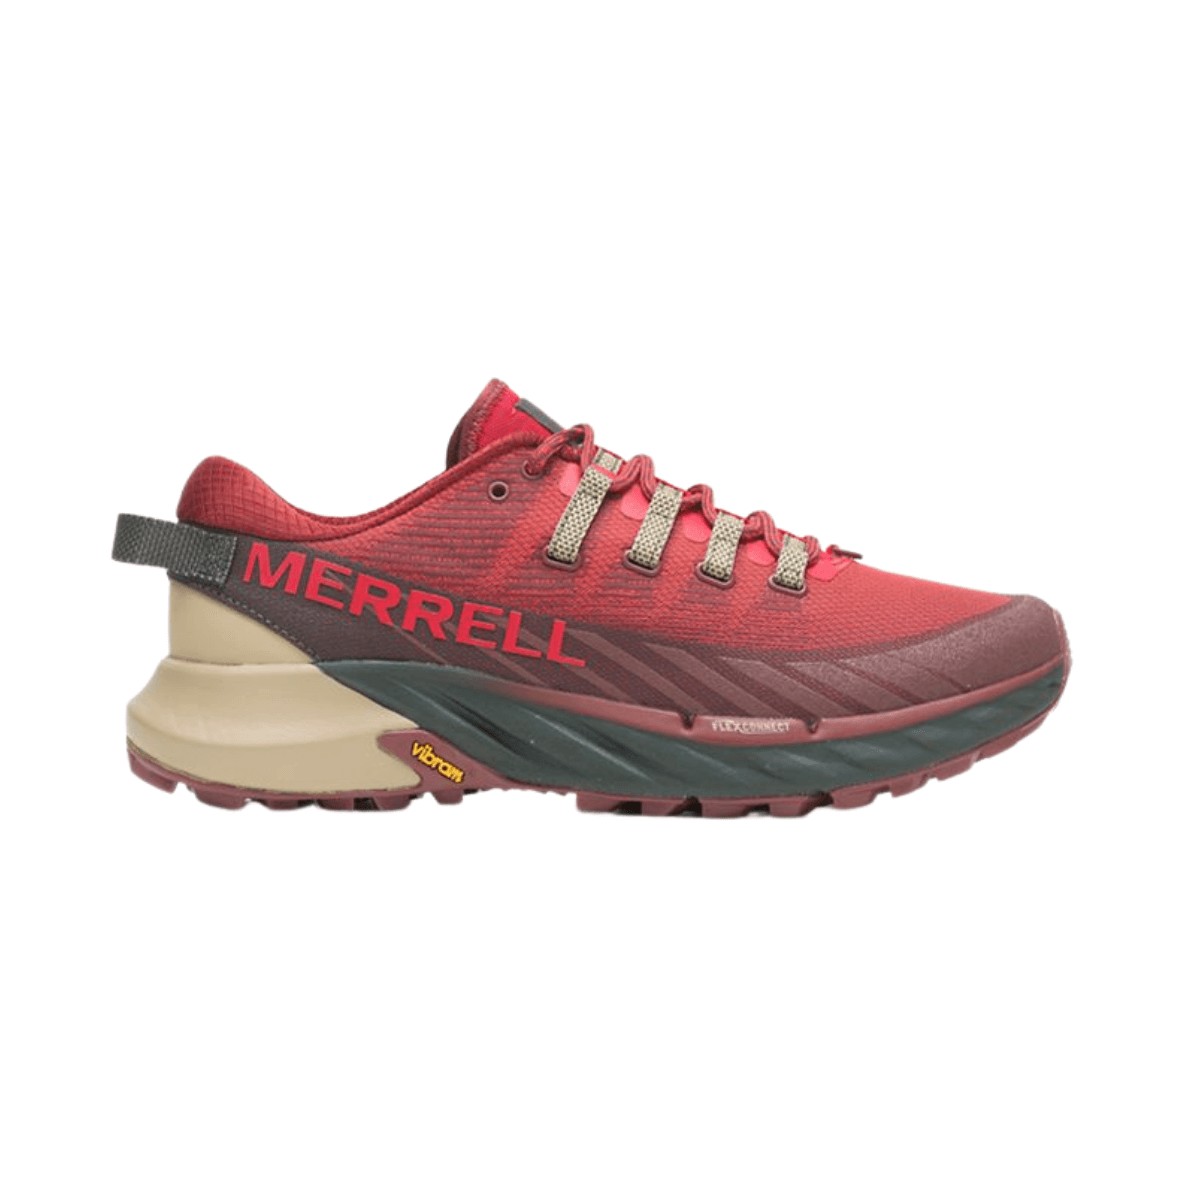 Chaussures Merrell Agility Peak 4 Rouge Bordeaux AW22, Taille 42 - EUR